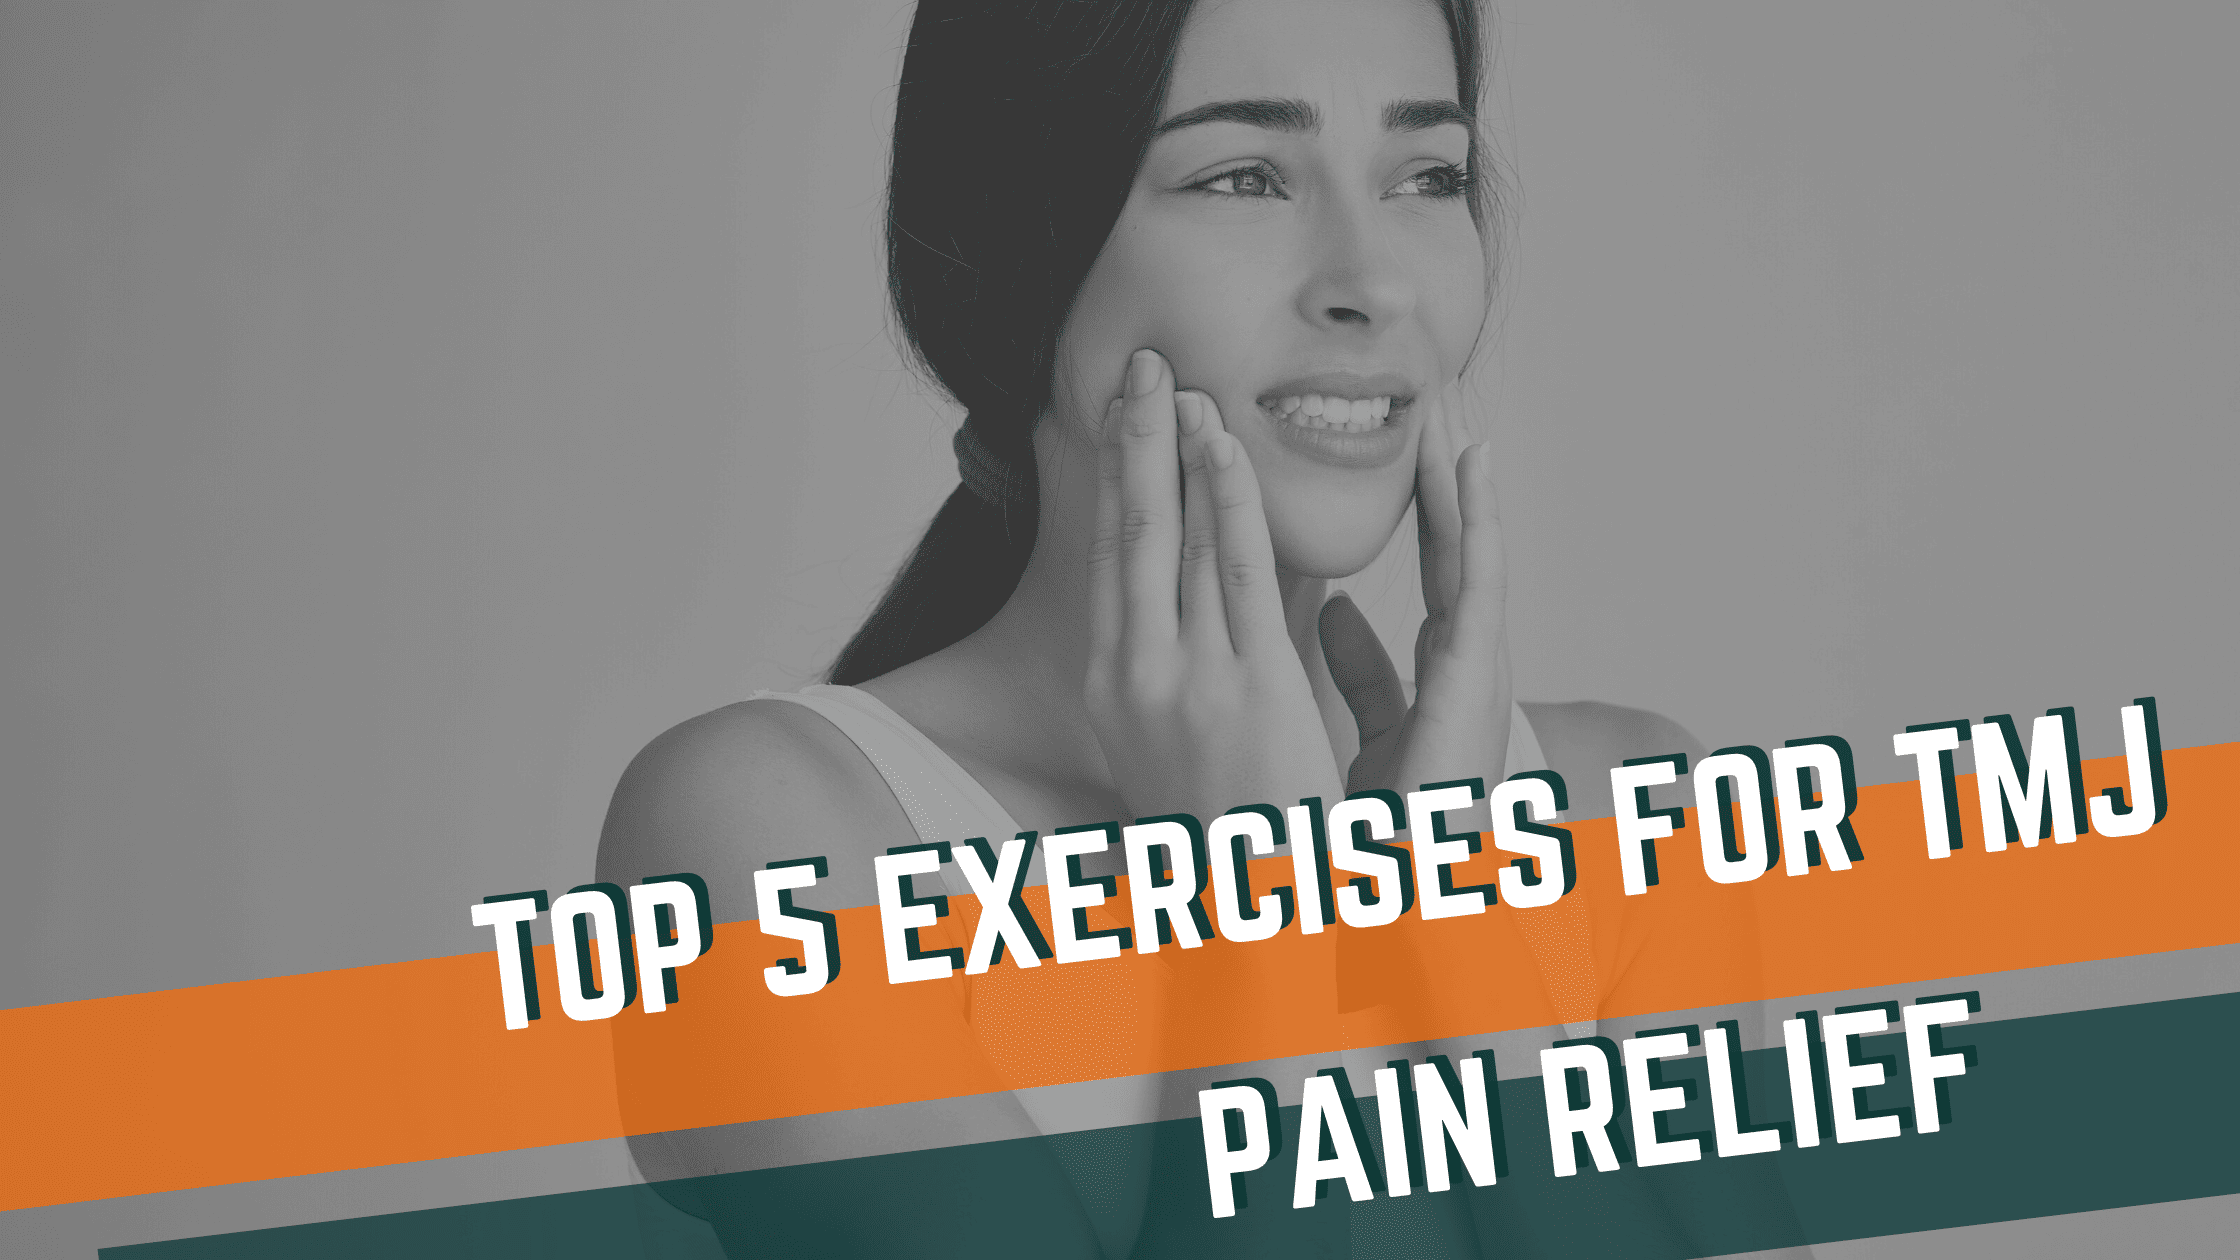 Featured image for “Top 5 Exercises for TMJ Pain Relief”